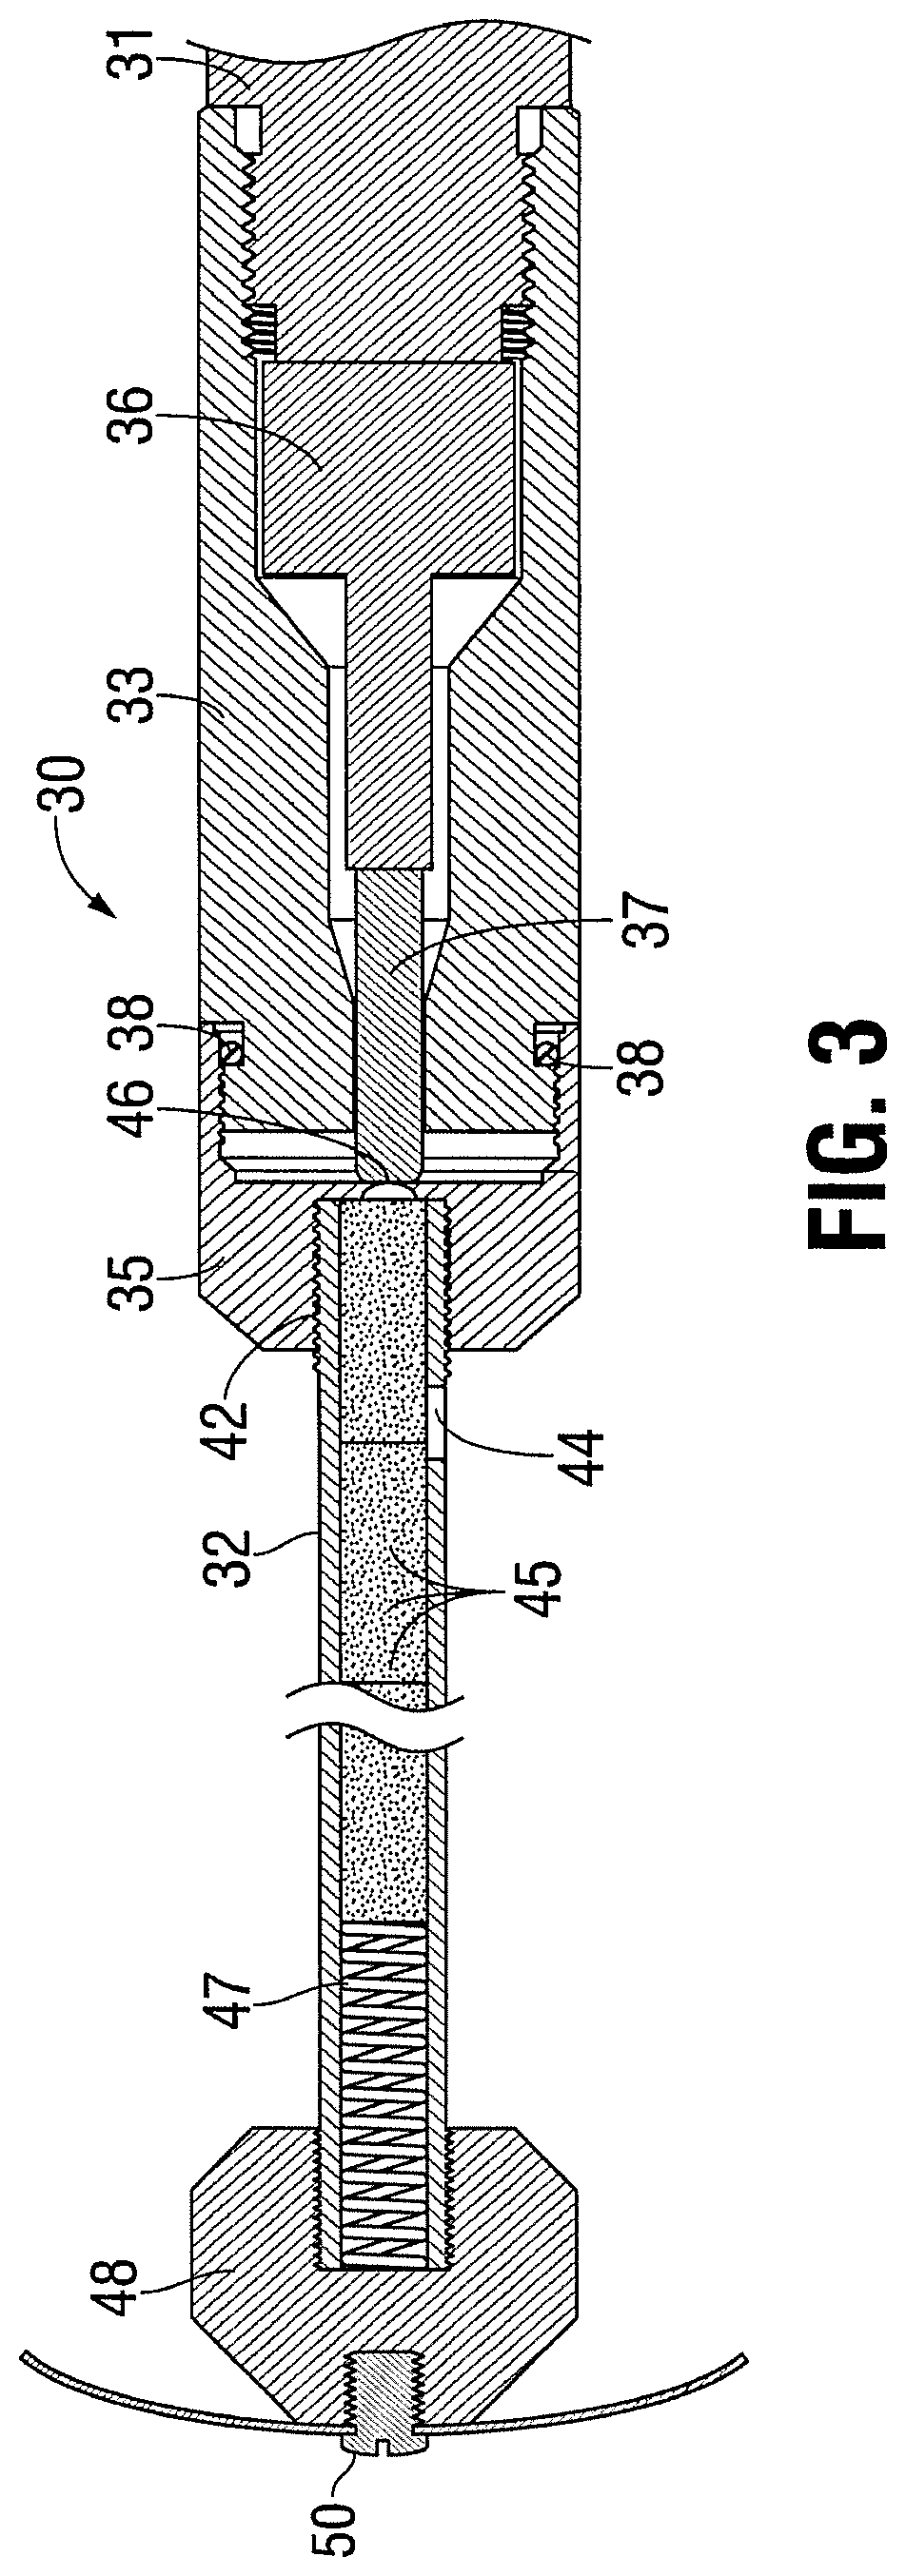 Mini-severing and back-off tool with pressure balanced explosives